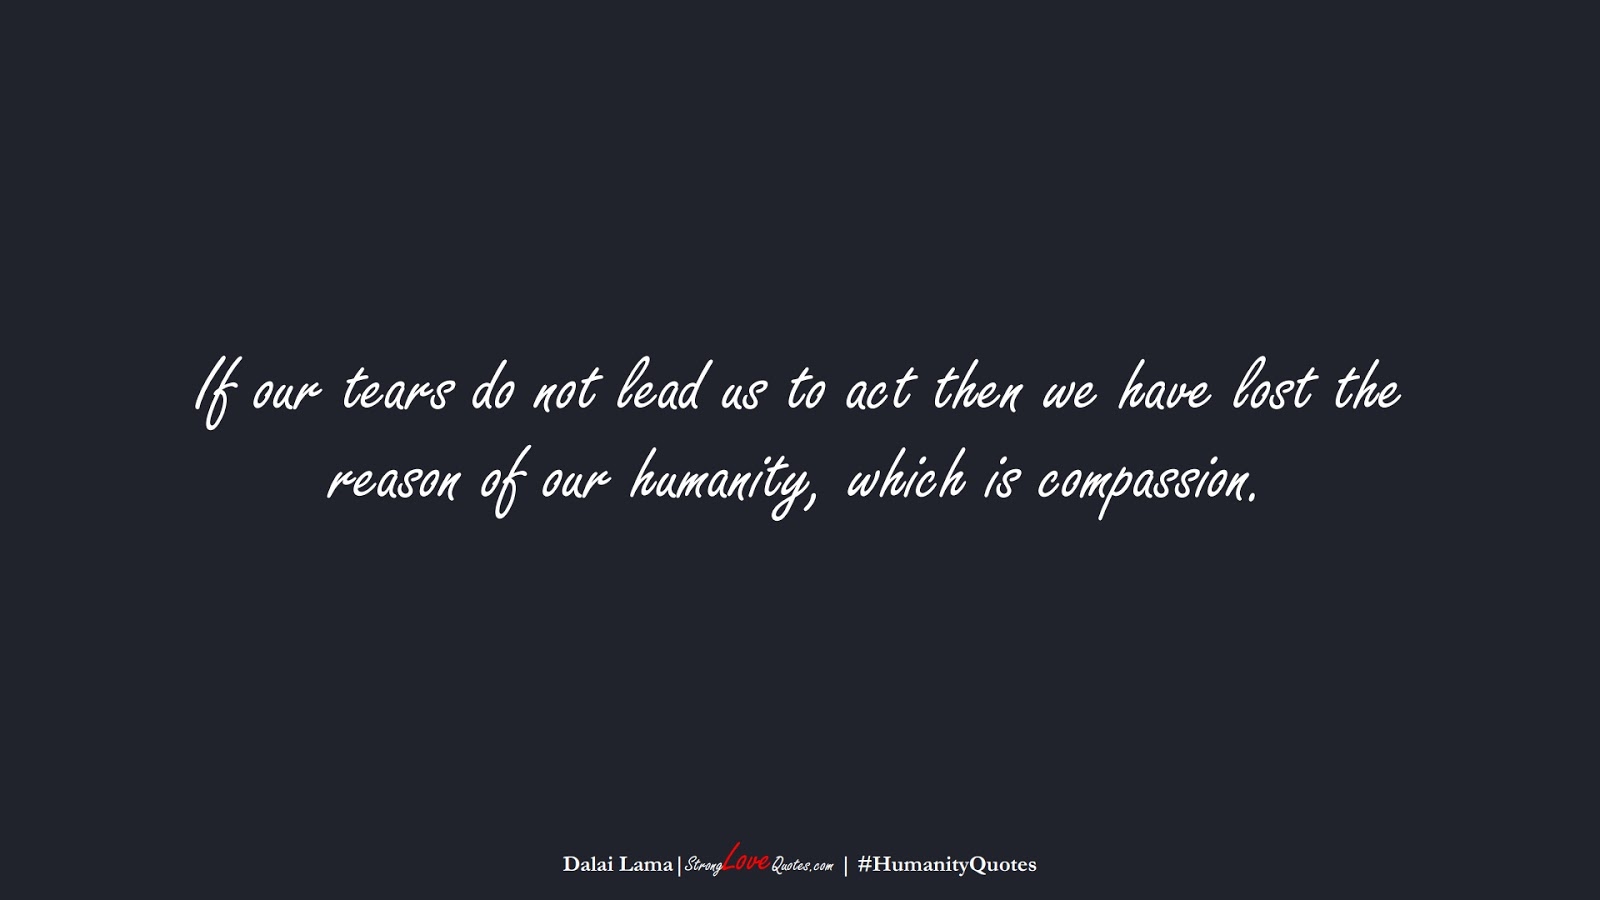 If our tears do not lead us to act then we have lost the reason of our humanity, which is compassion. (Dalai Lama);  #HumanityQuotes